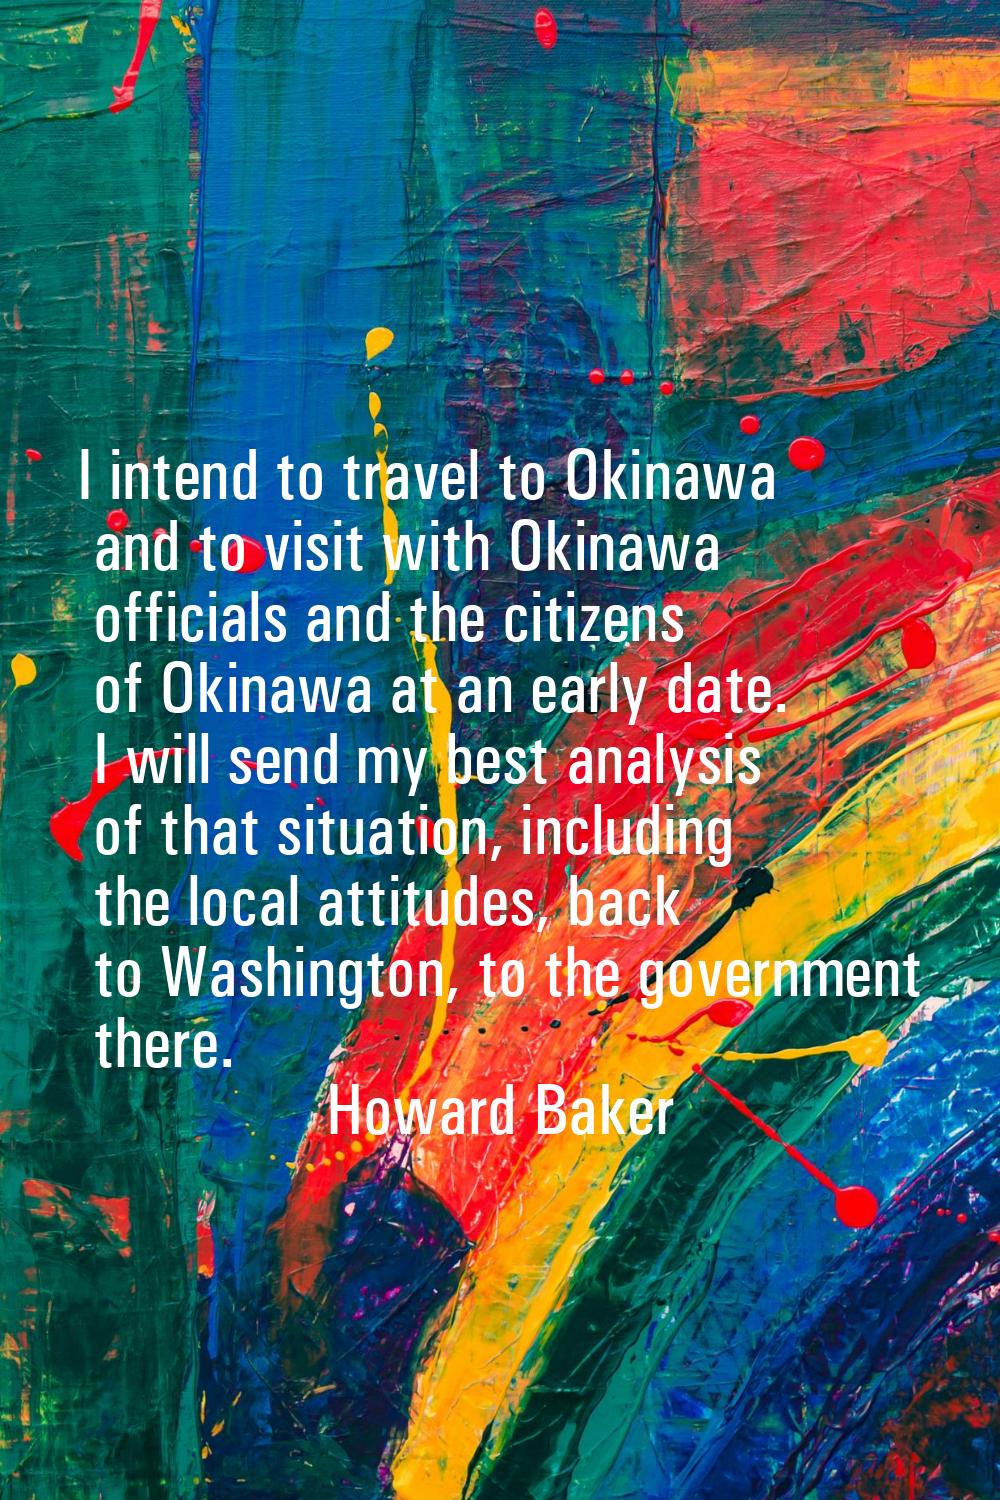 I intend to travel to Okinawa and to visit with Okinawa officials and the citizens of Okinawa at an